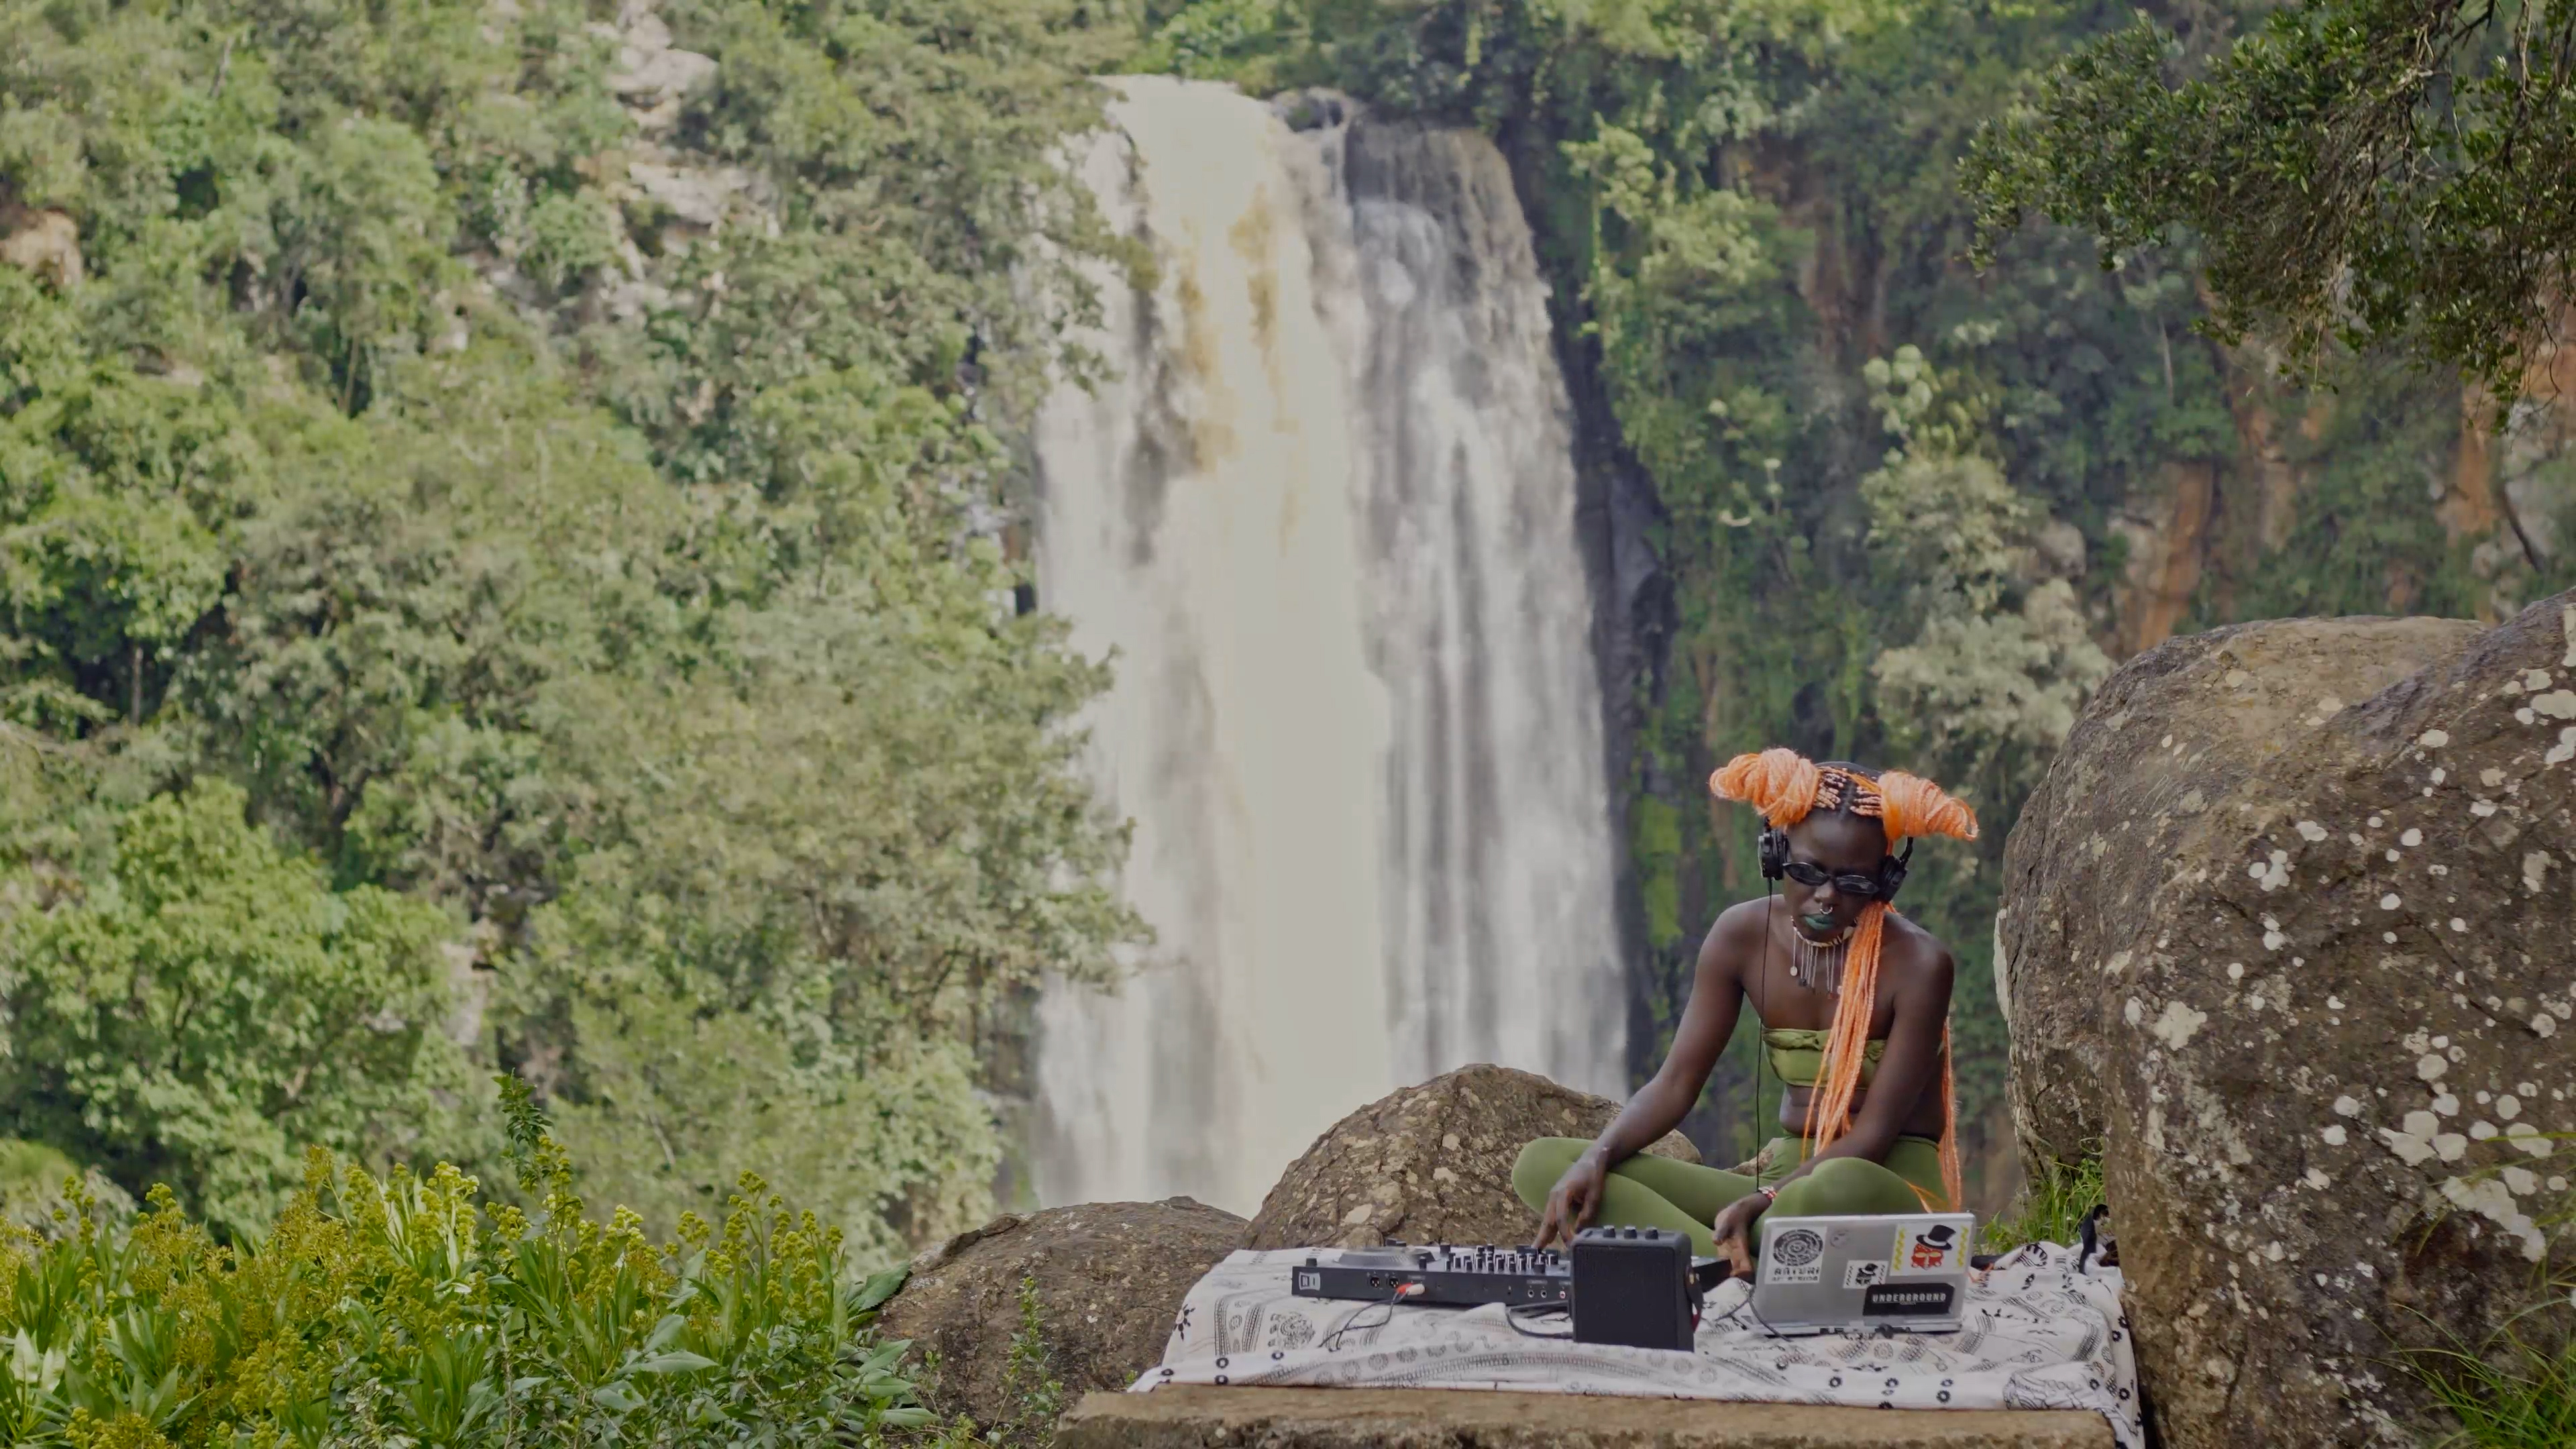 For the artwork “Warm Fronts” by Kent Chan, Makossiri performs near a tropical waterfall. Makossiri is a musician and a DJ.